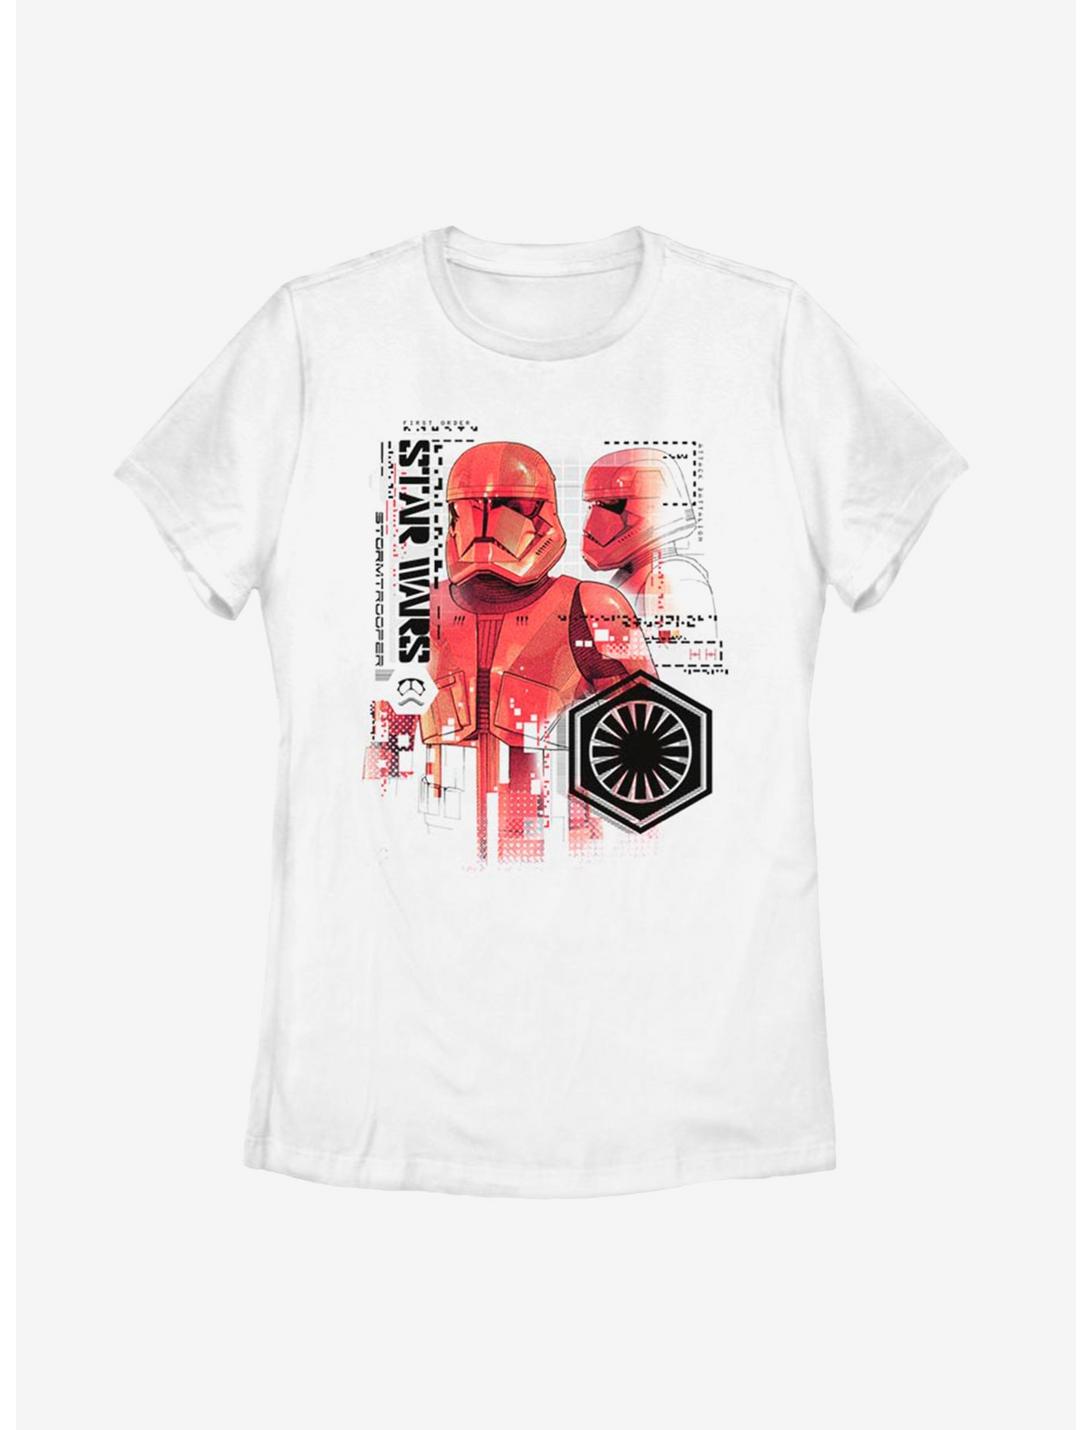 Star Wars Episode IX The Rise Of Skywalker Red Trooper Schematic Womens T-Shirt, WHITE, hi-res